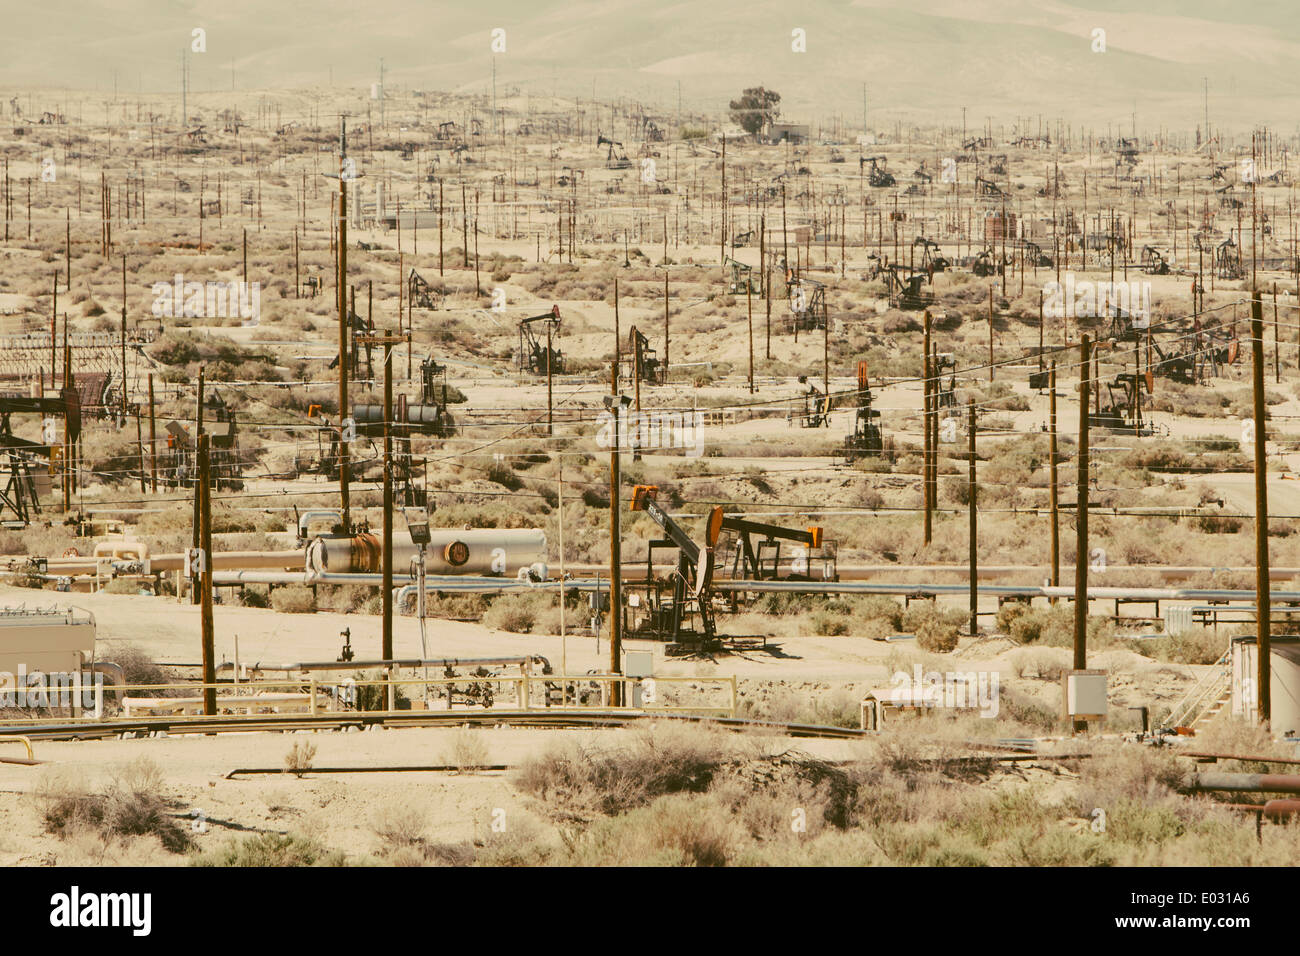 Crude oil extraction from Monterey Shale near Bakersfield California USA. Stock Photo